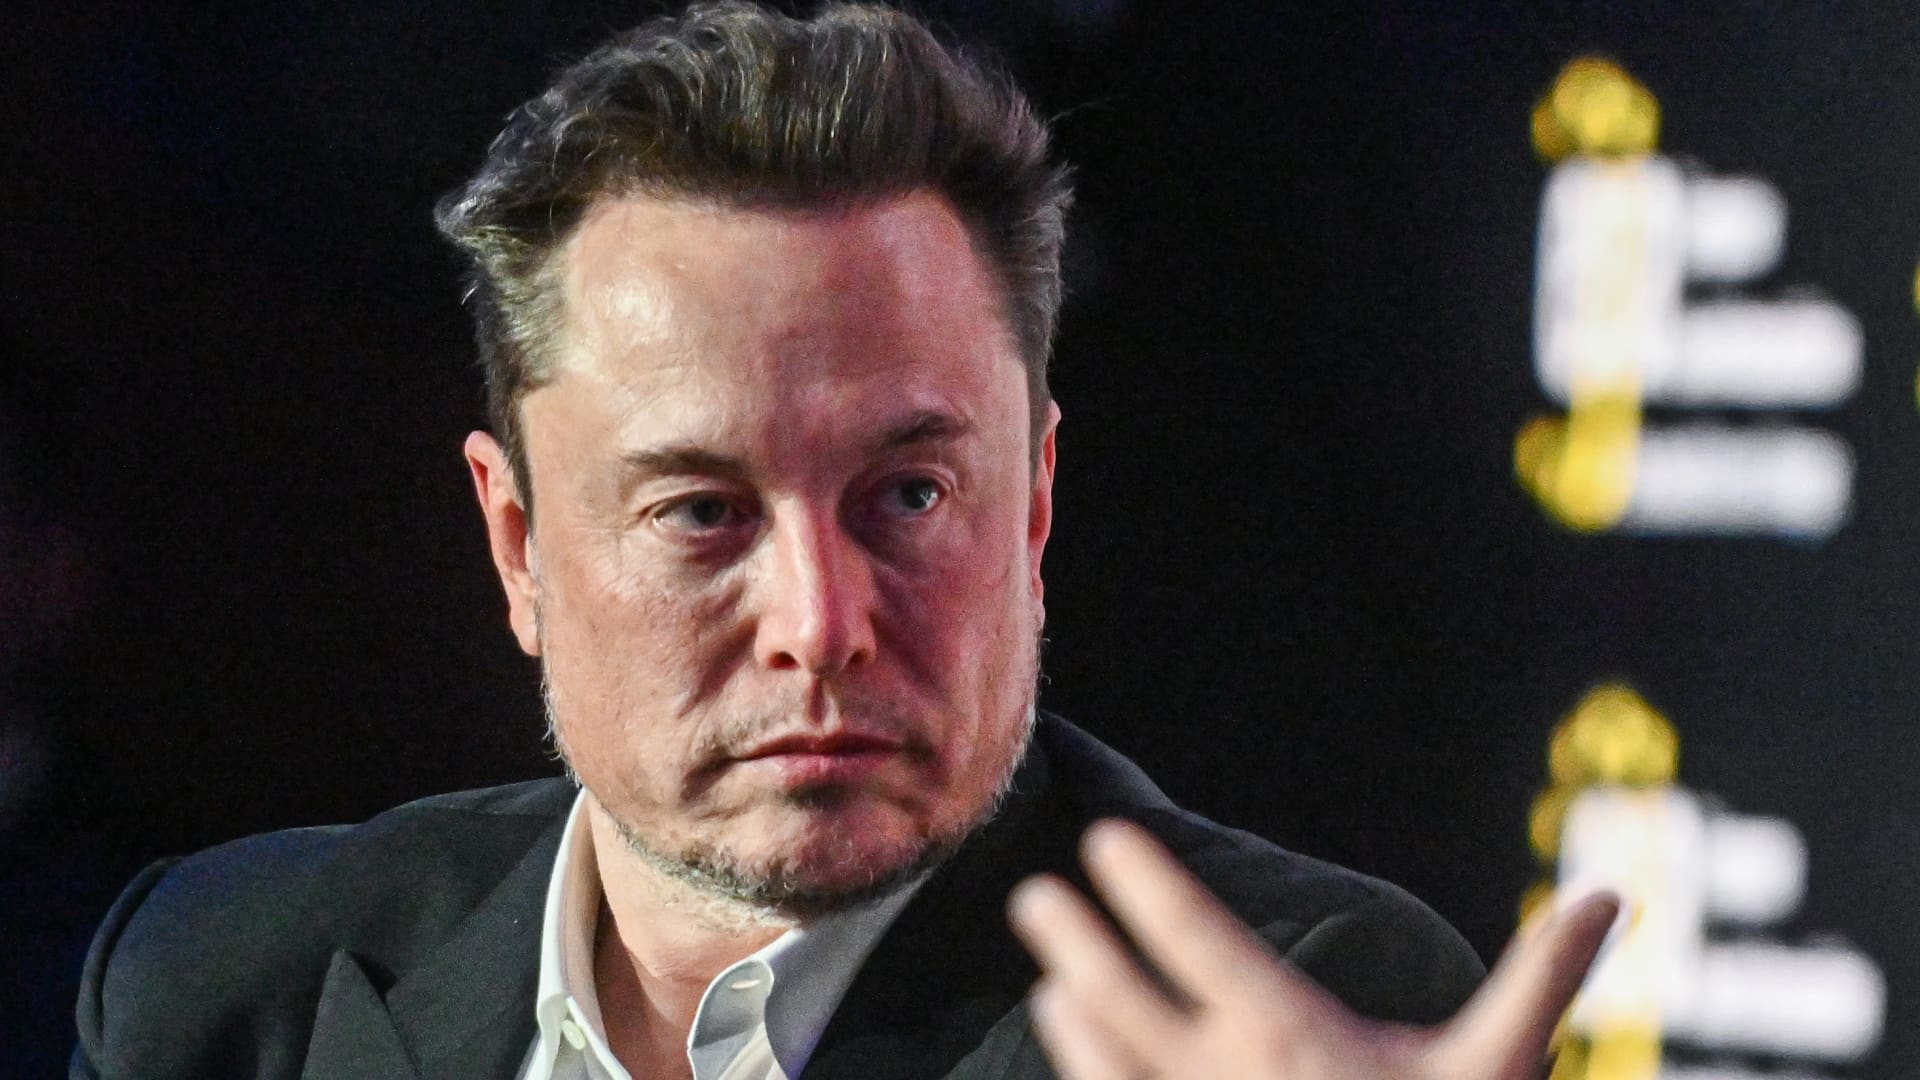 Elon Musk’s X loses lawsuit against Bright Data over data scraping [Video]